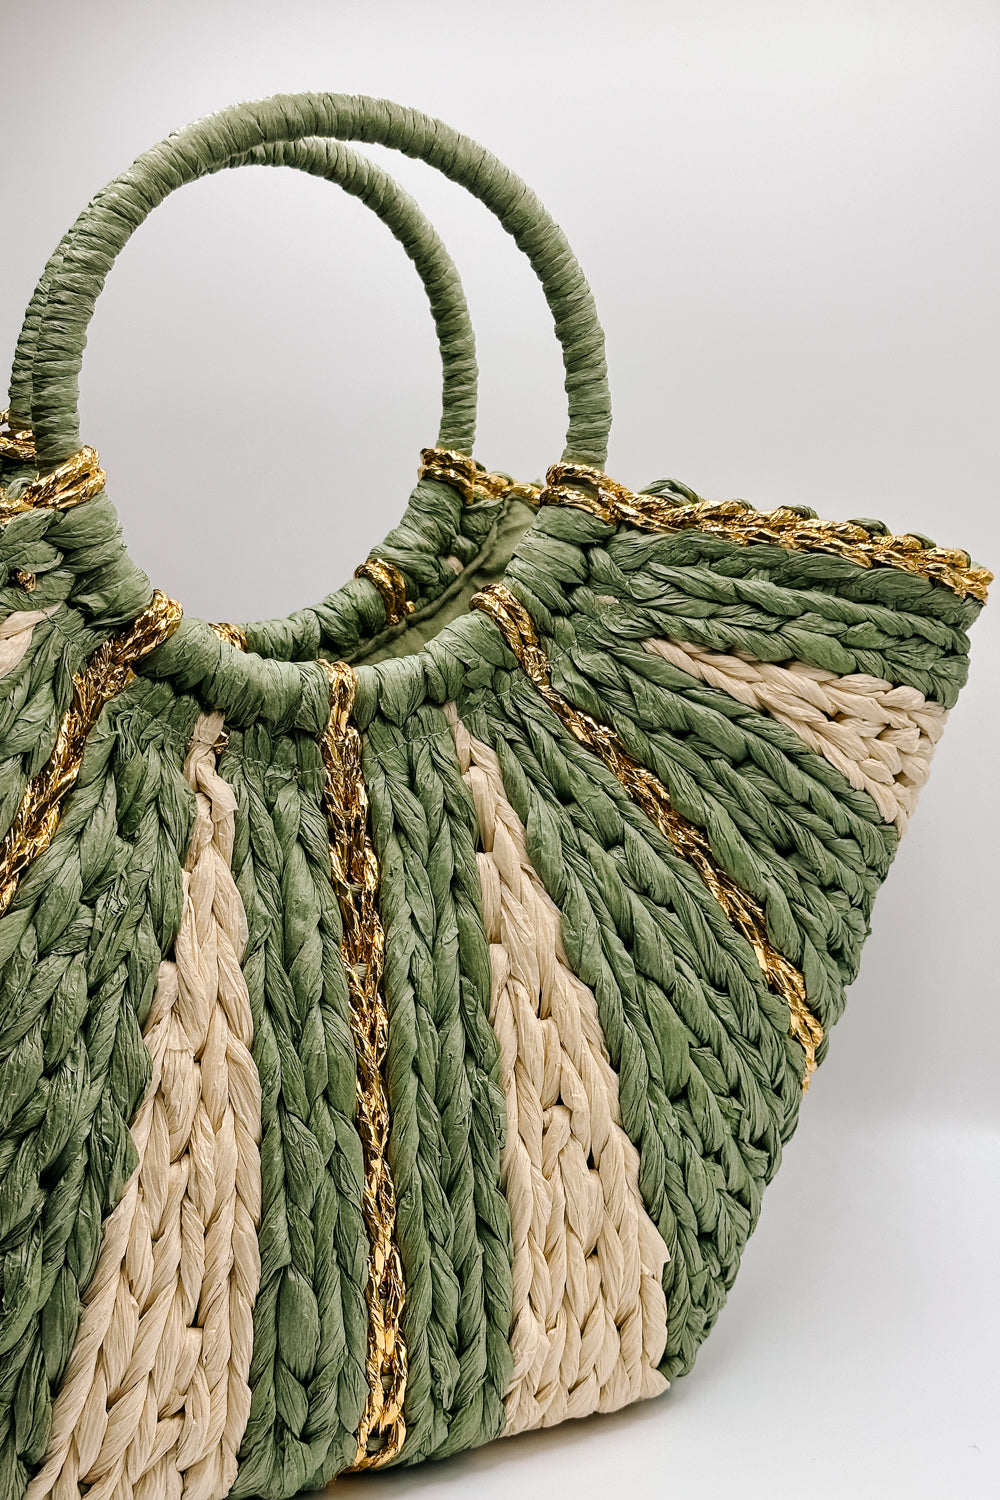 Front view of the Aurora Olive & Natural Woven Tote which features sage and natural woven braided fabric, gold thread details, round handles and sag lining